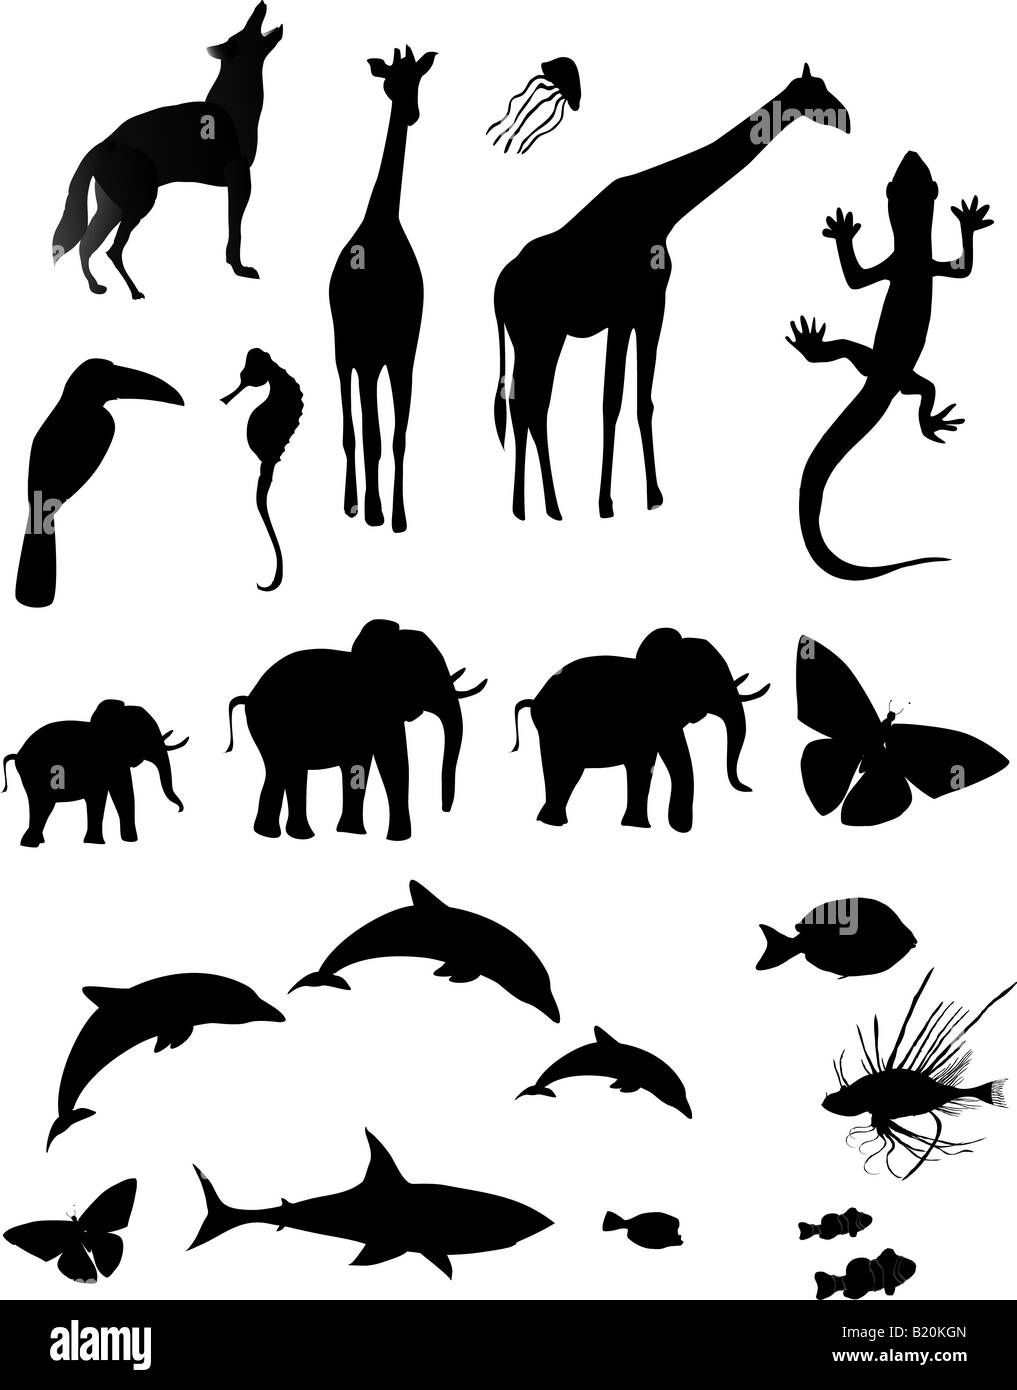 Silhouetted shapes of various animals Stock Photo